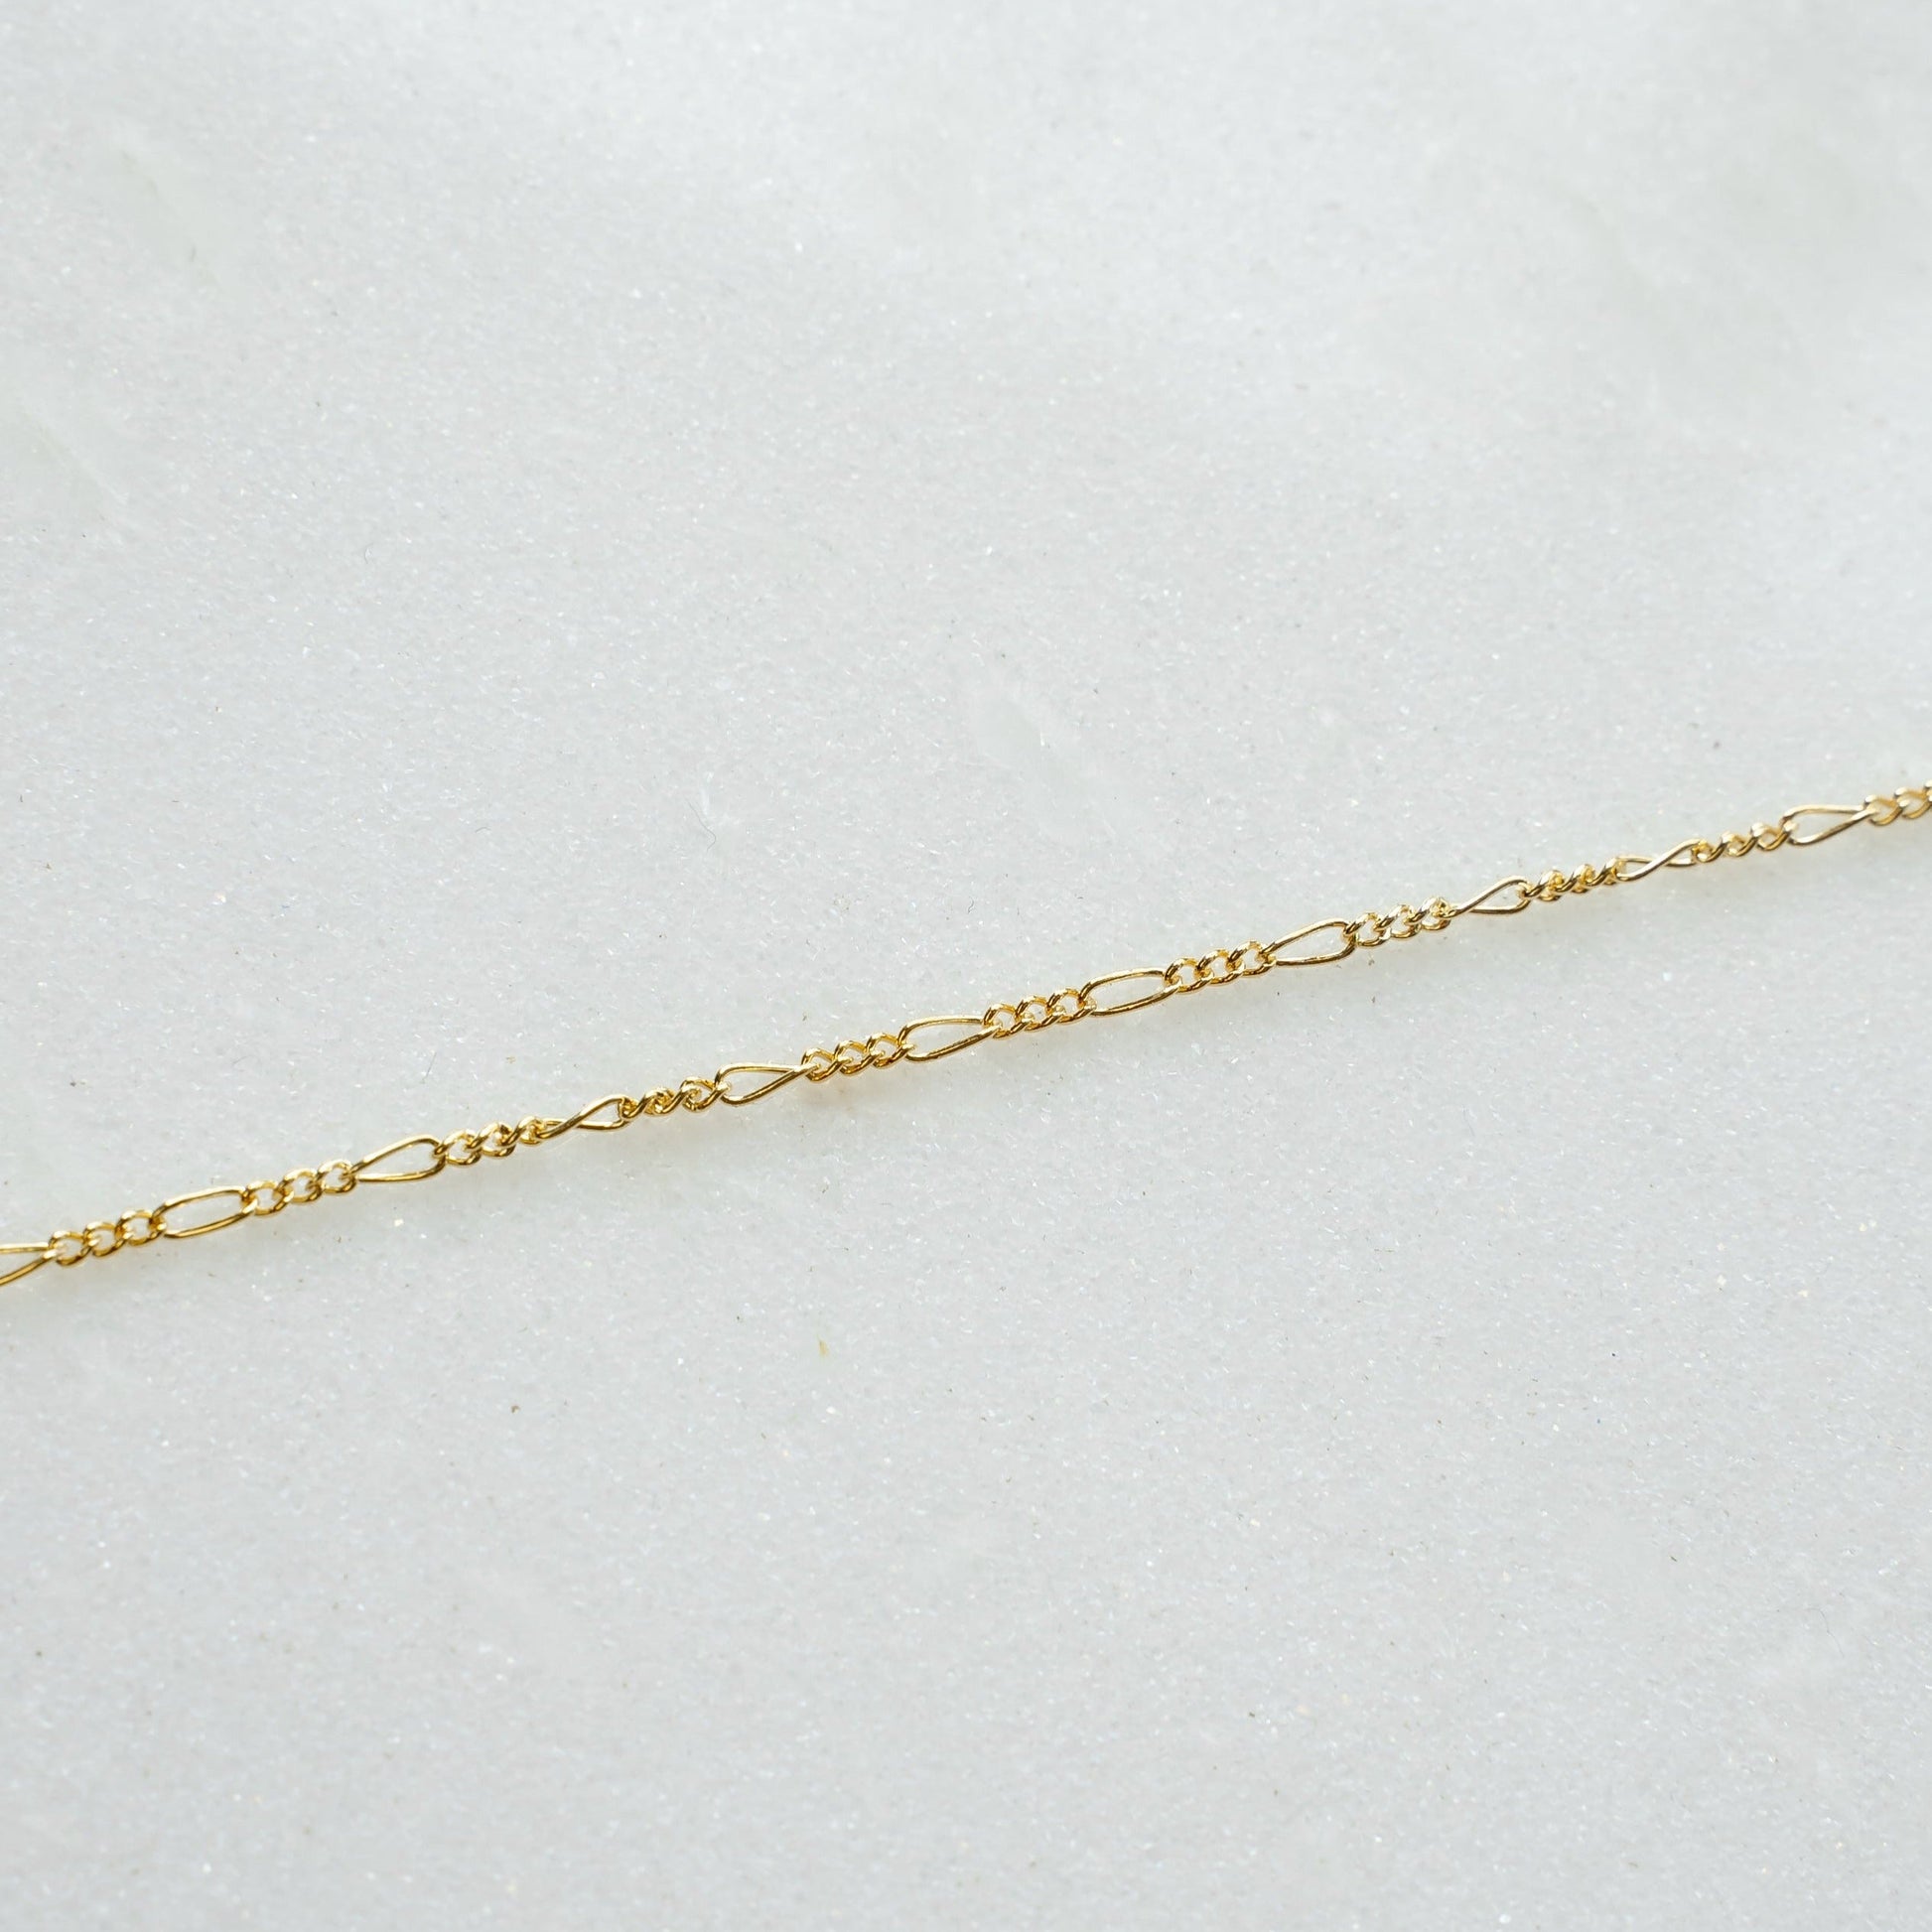 Lovely Links Permanent Jewelry JEWELRY The Sis Kiss Gold Filled 1.7mm Figaro Link Chain 15 Minutes